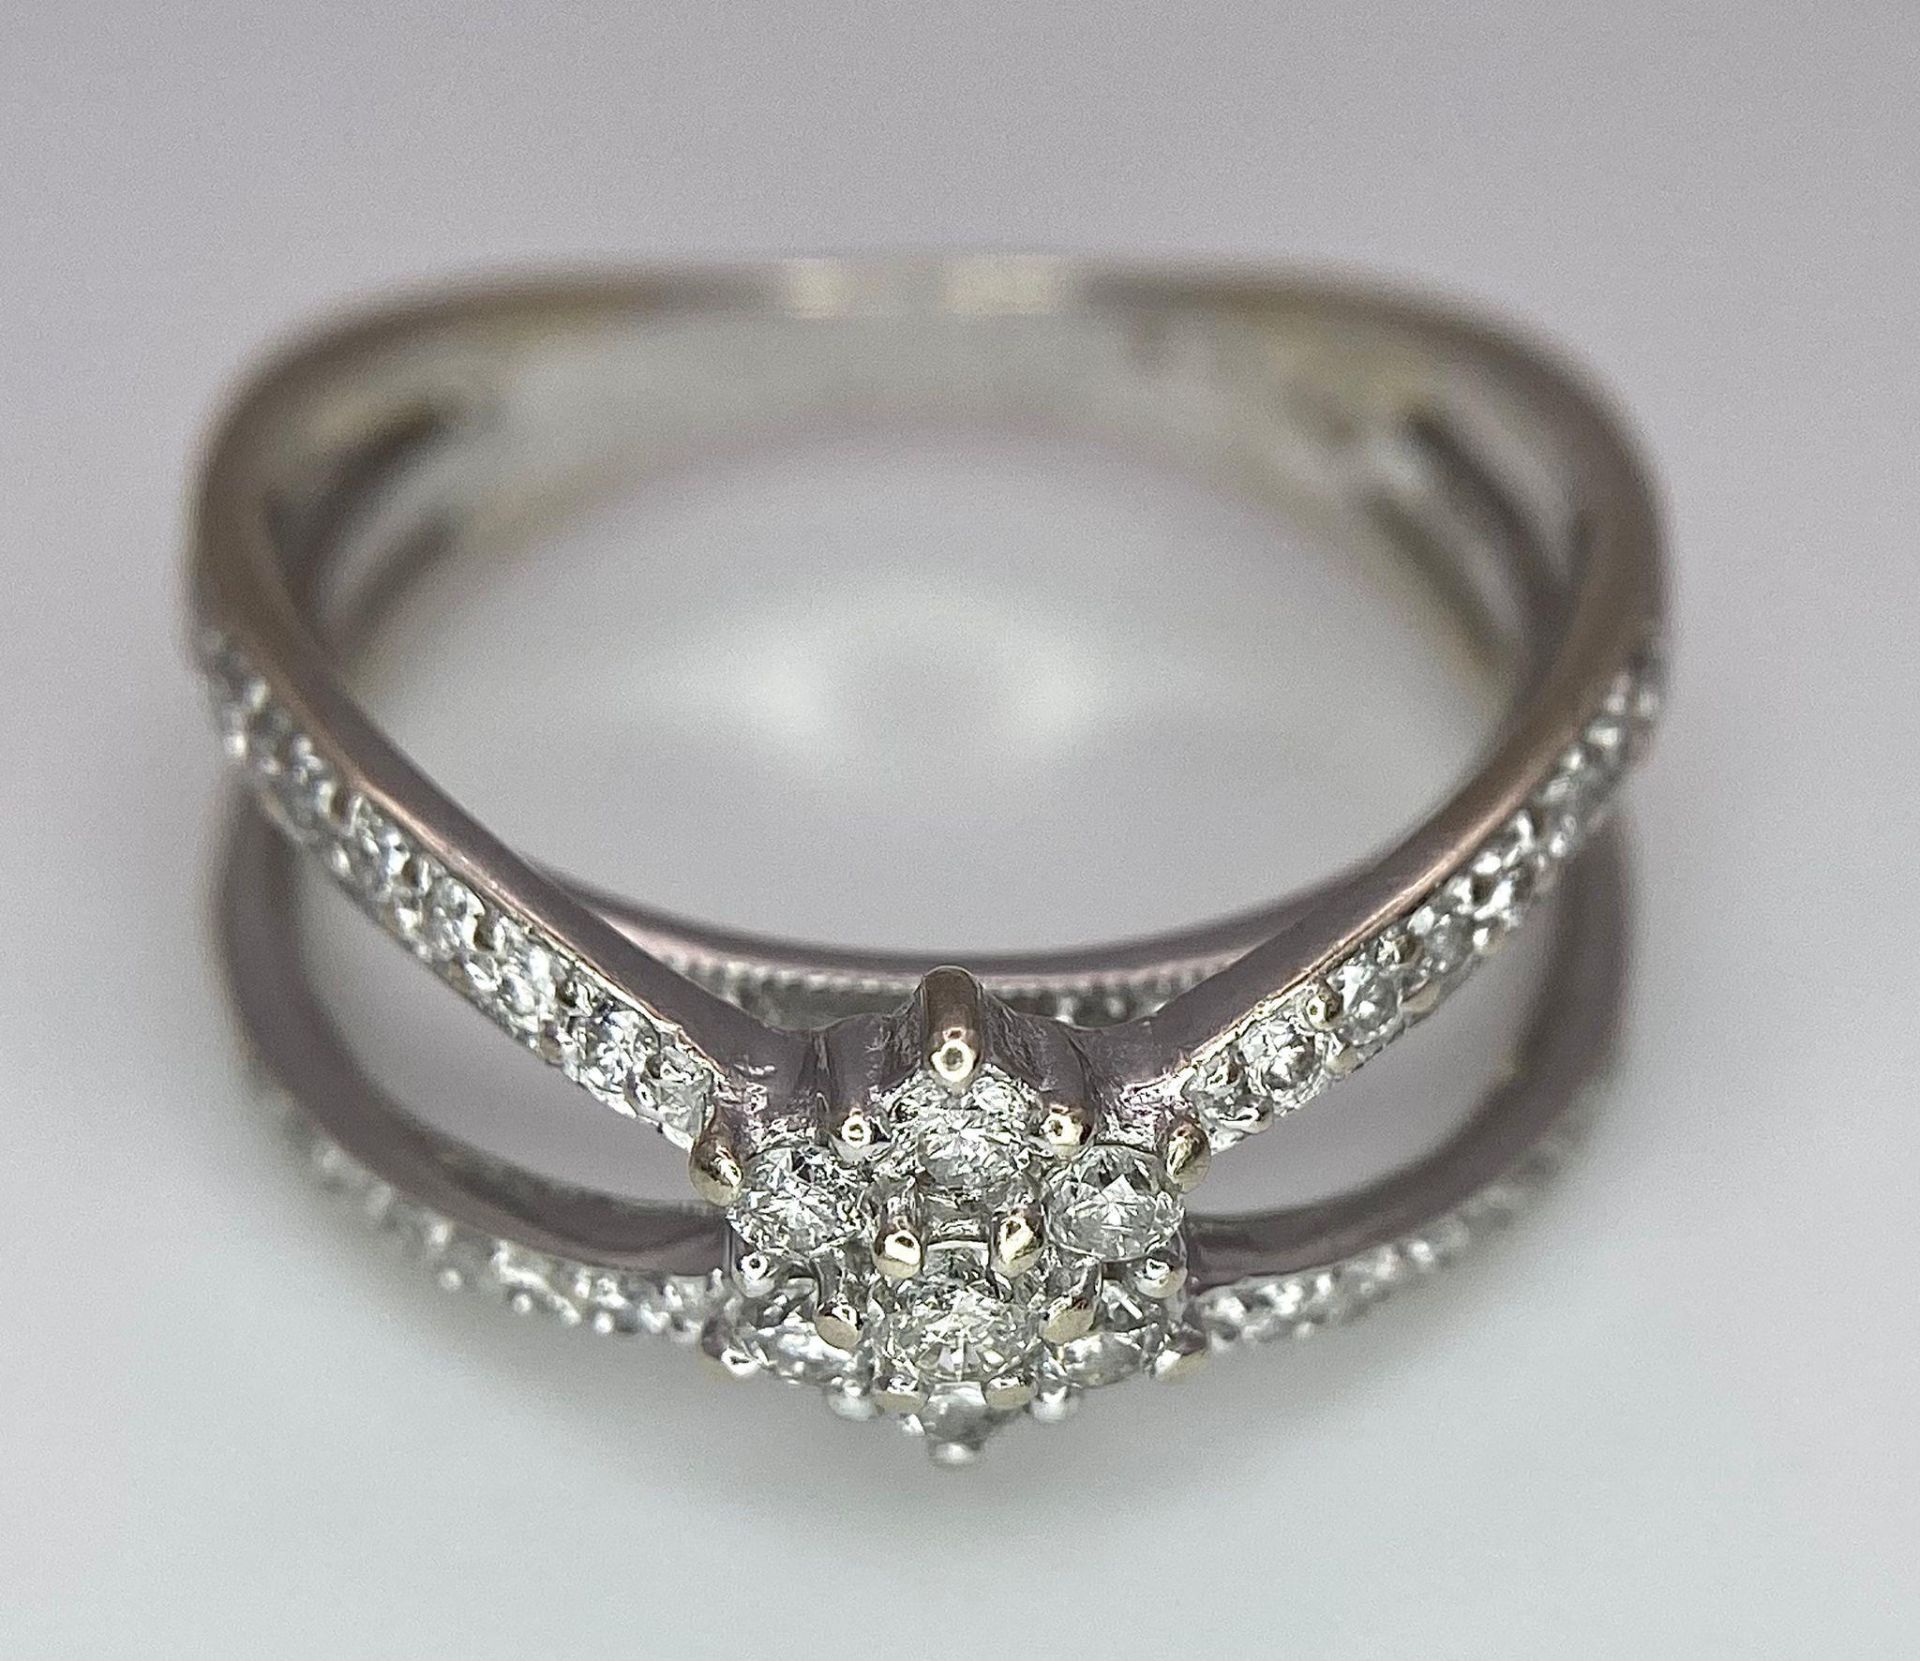 A UNIQUE DESIGNED 18K WHITE GOLD DIAMOND SPLIT RING, APPROX 0.40CT DIAMONDS, WEIGHT 4.9G SIZE O - Image 5 of 6